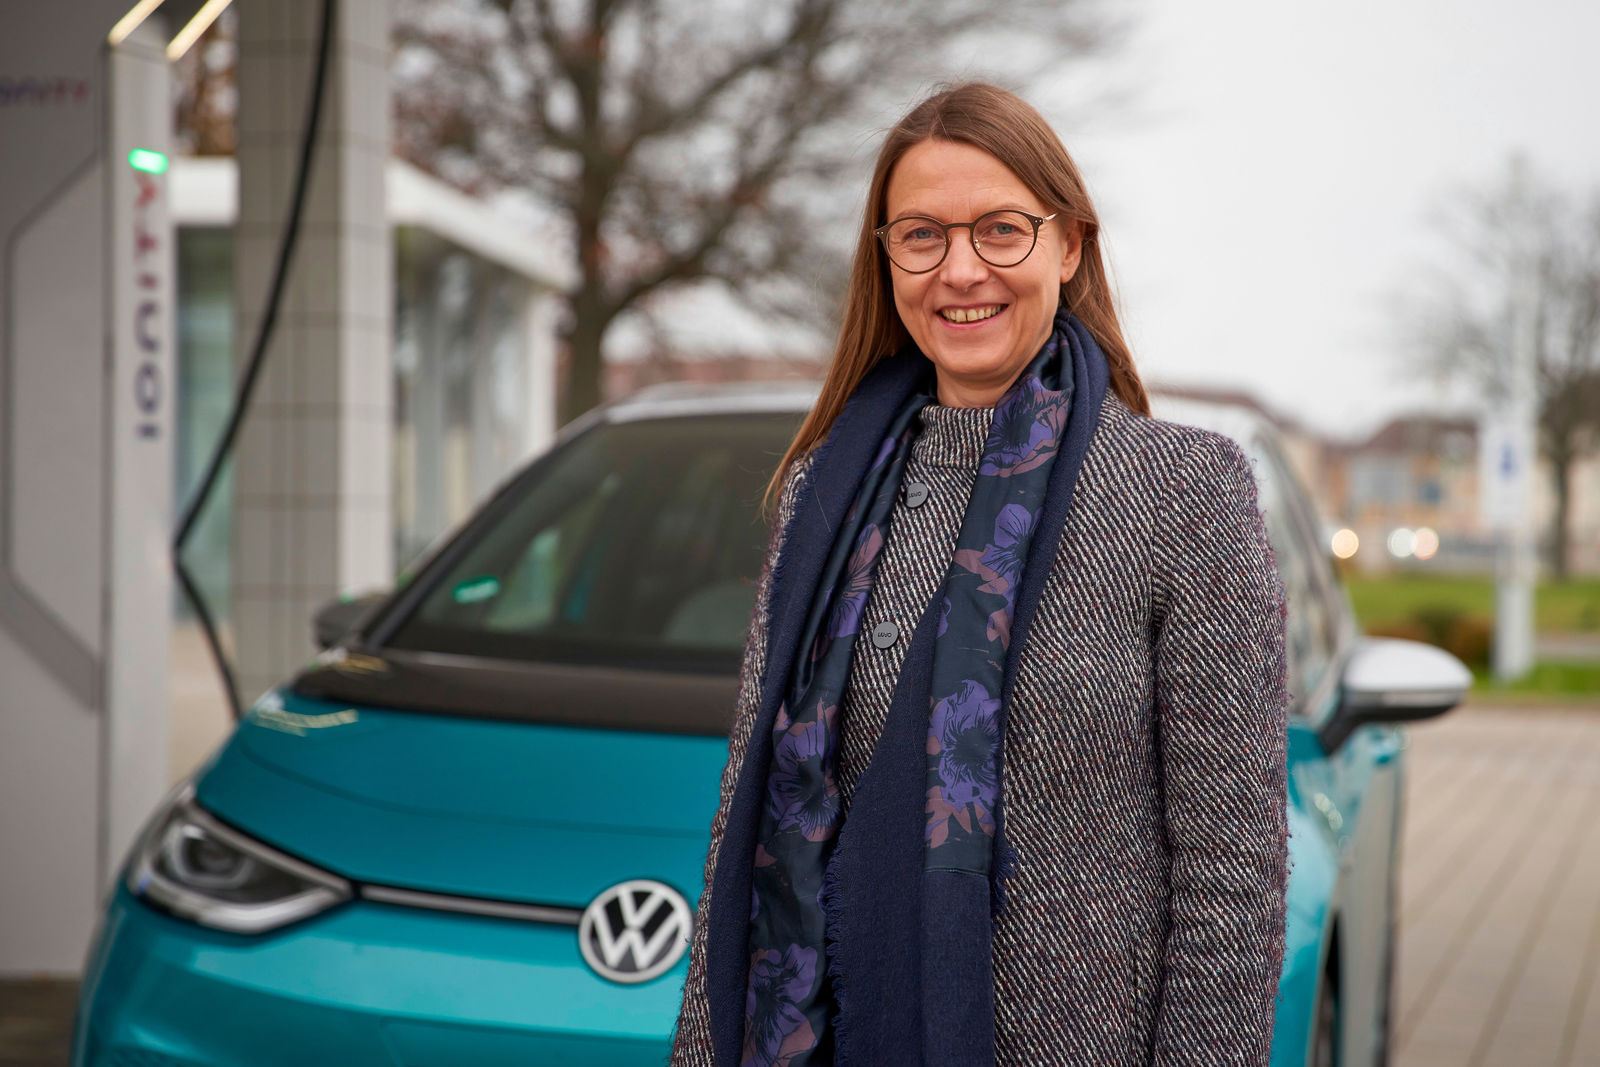 Story "ID.3: Volkswagen team focuses on digital project management"